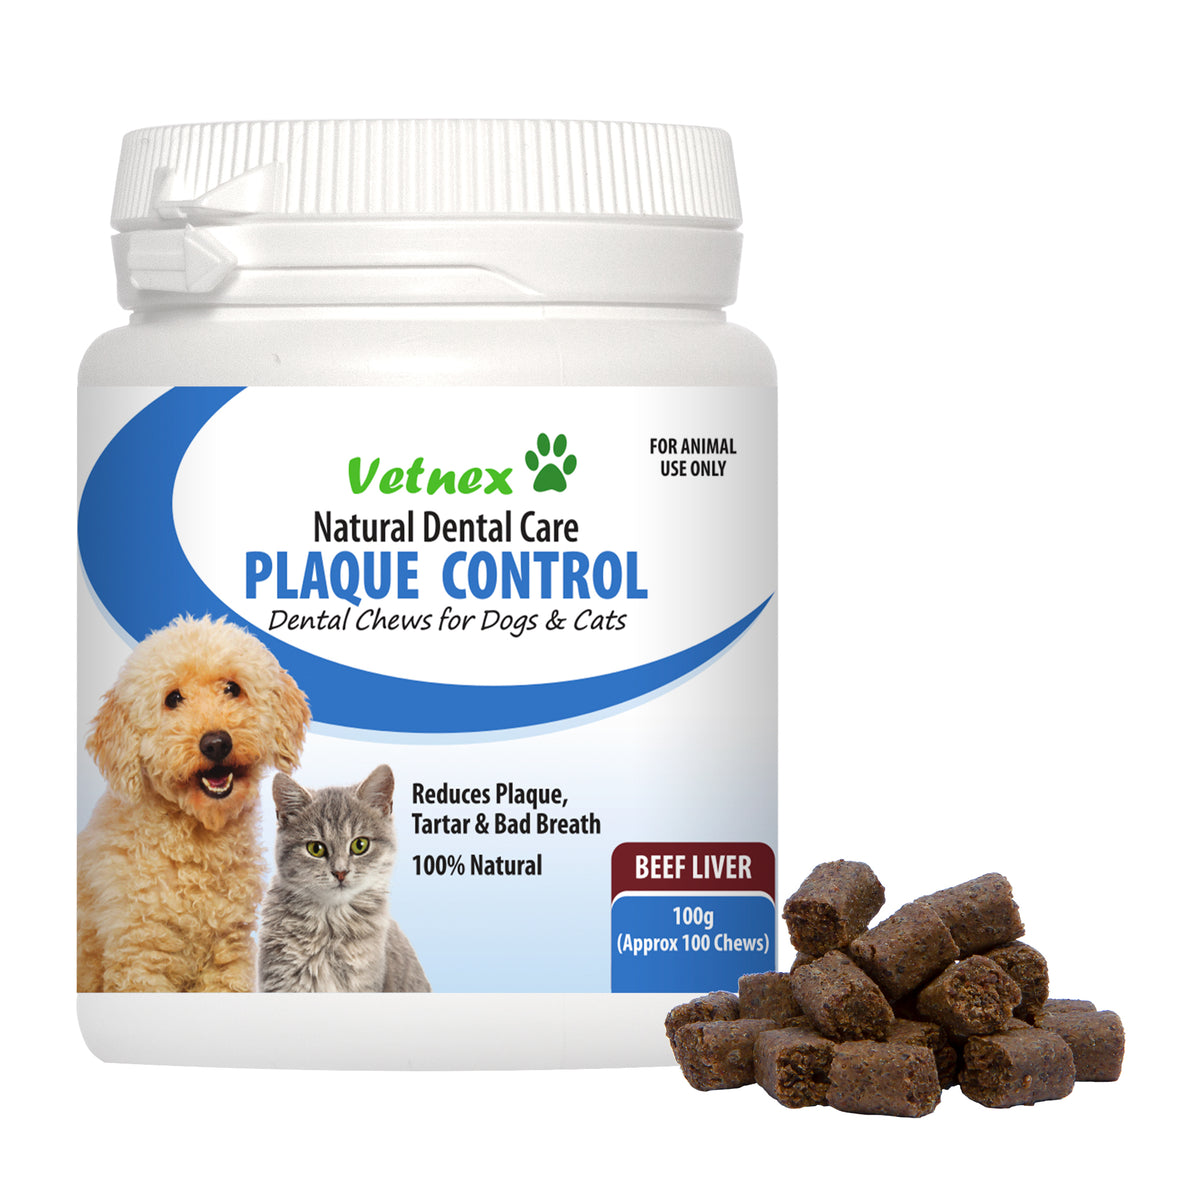 Vetnex Plaque Control Dental Chews for Dogs &amp; Cats 100g - Beef Liver